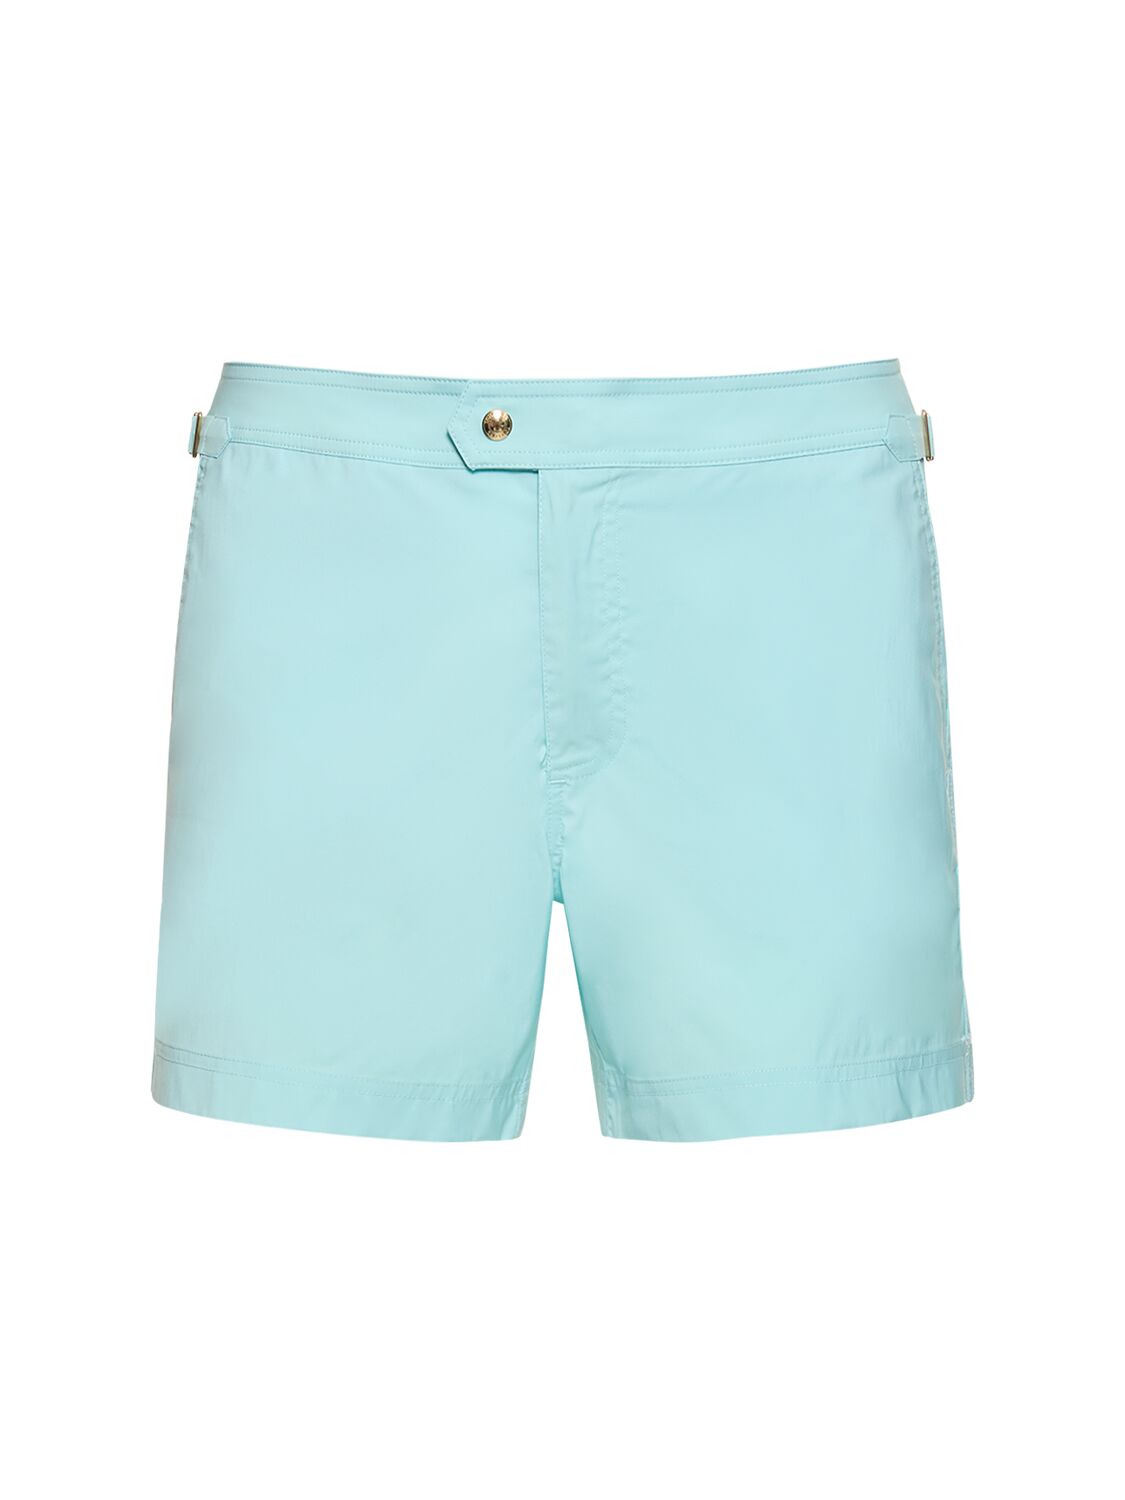 Tom Ford Compact Poplin Swim Shorts W/ Piping In Porcelain Blue